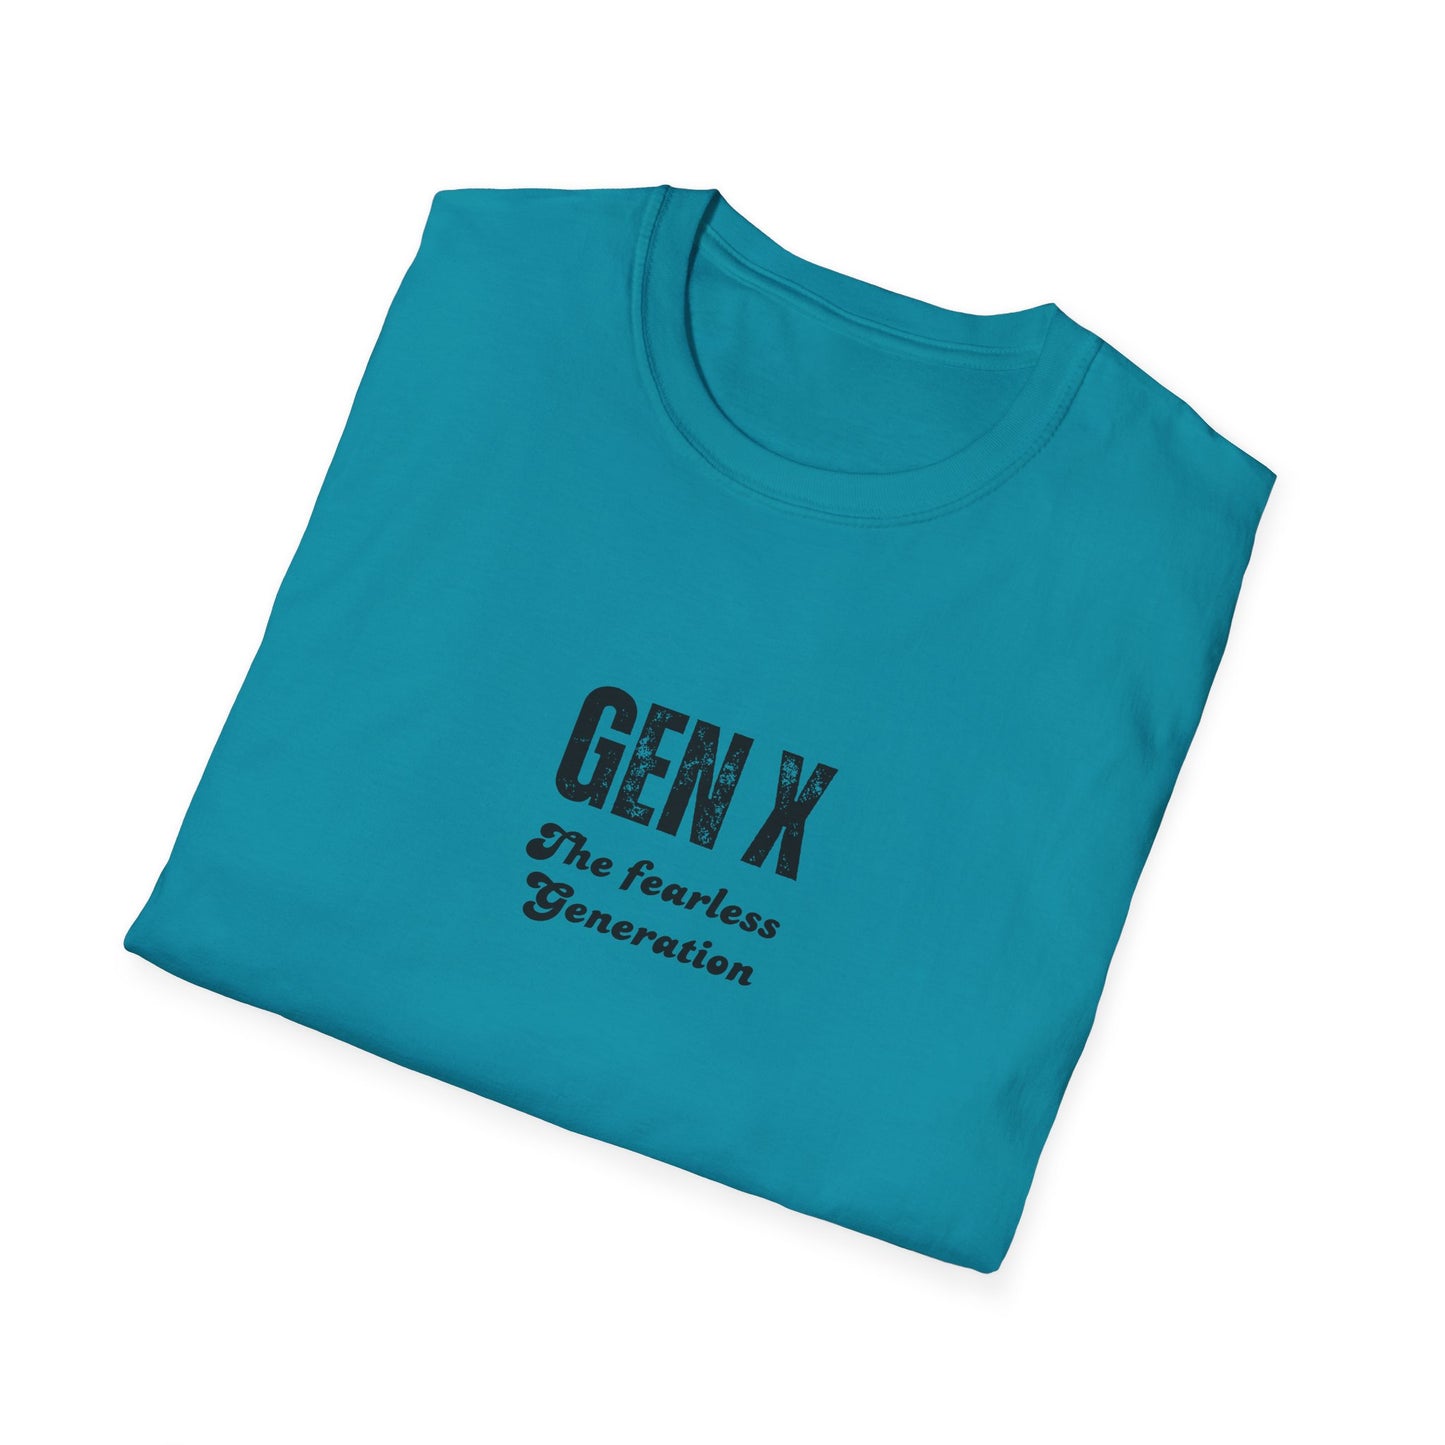 GenX Fearless Unisex Softstyle T-Shirt